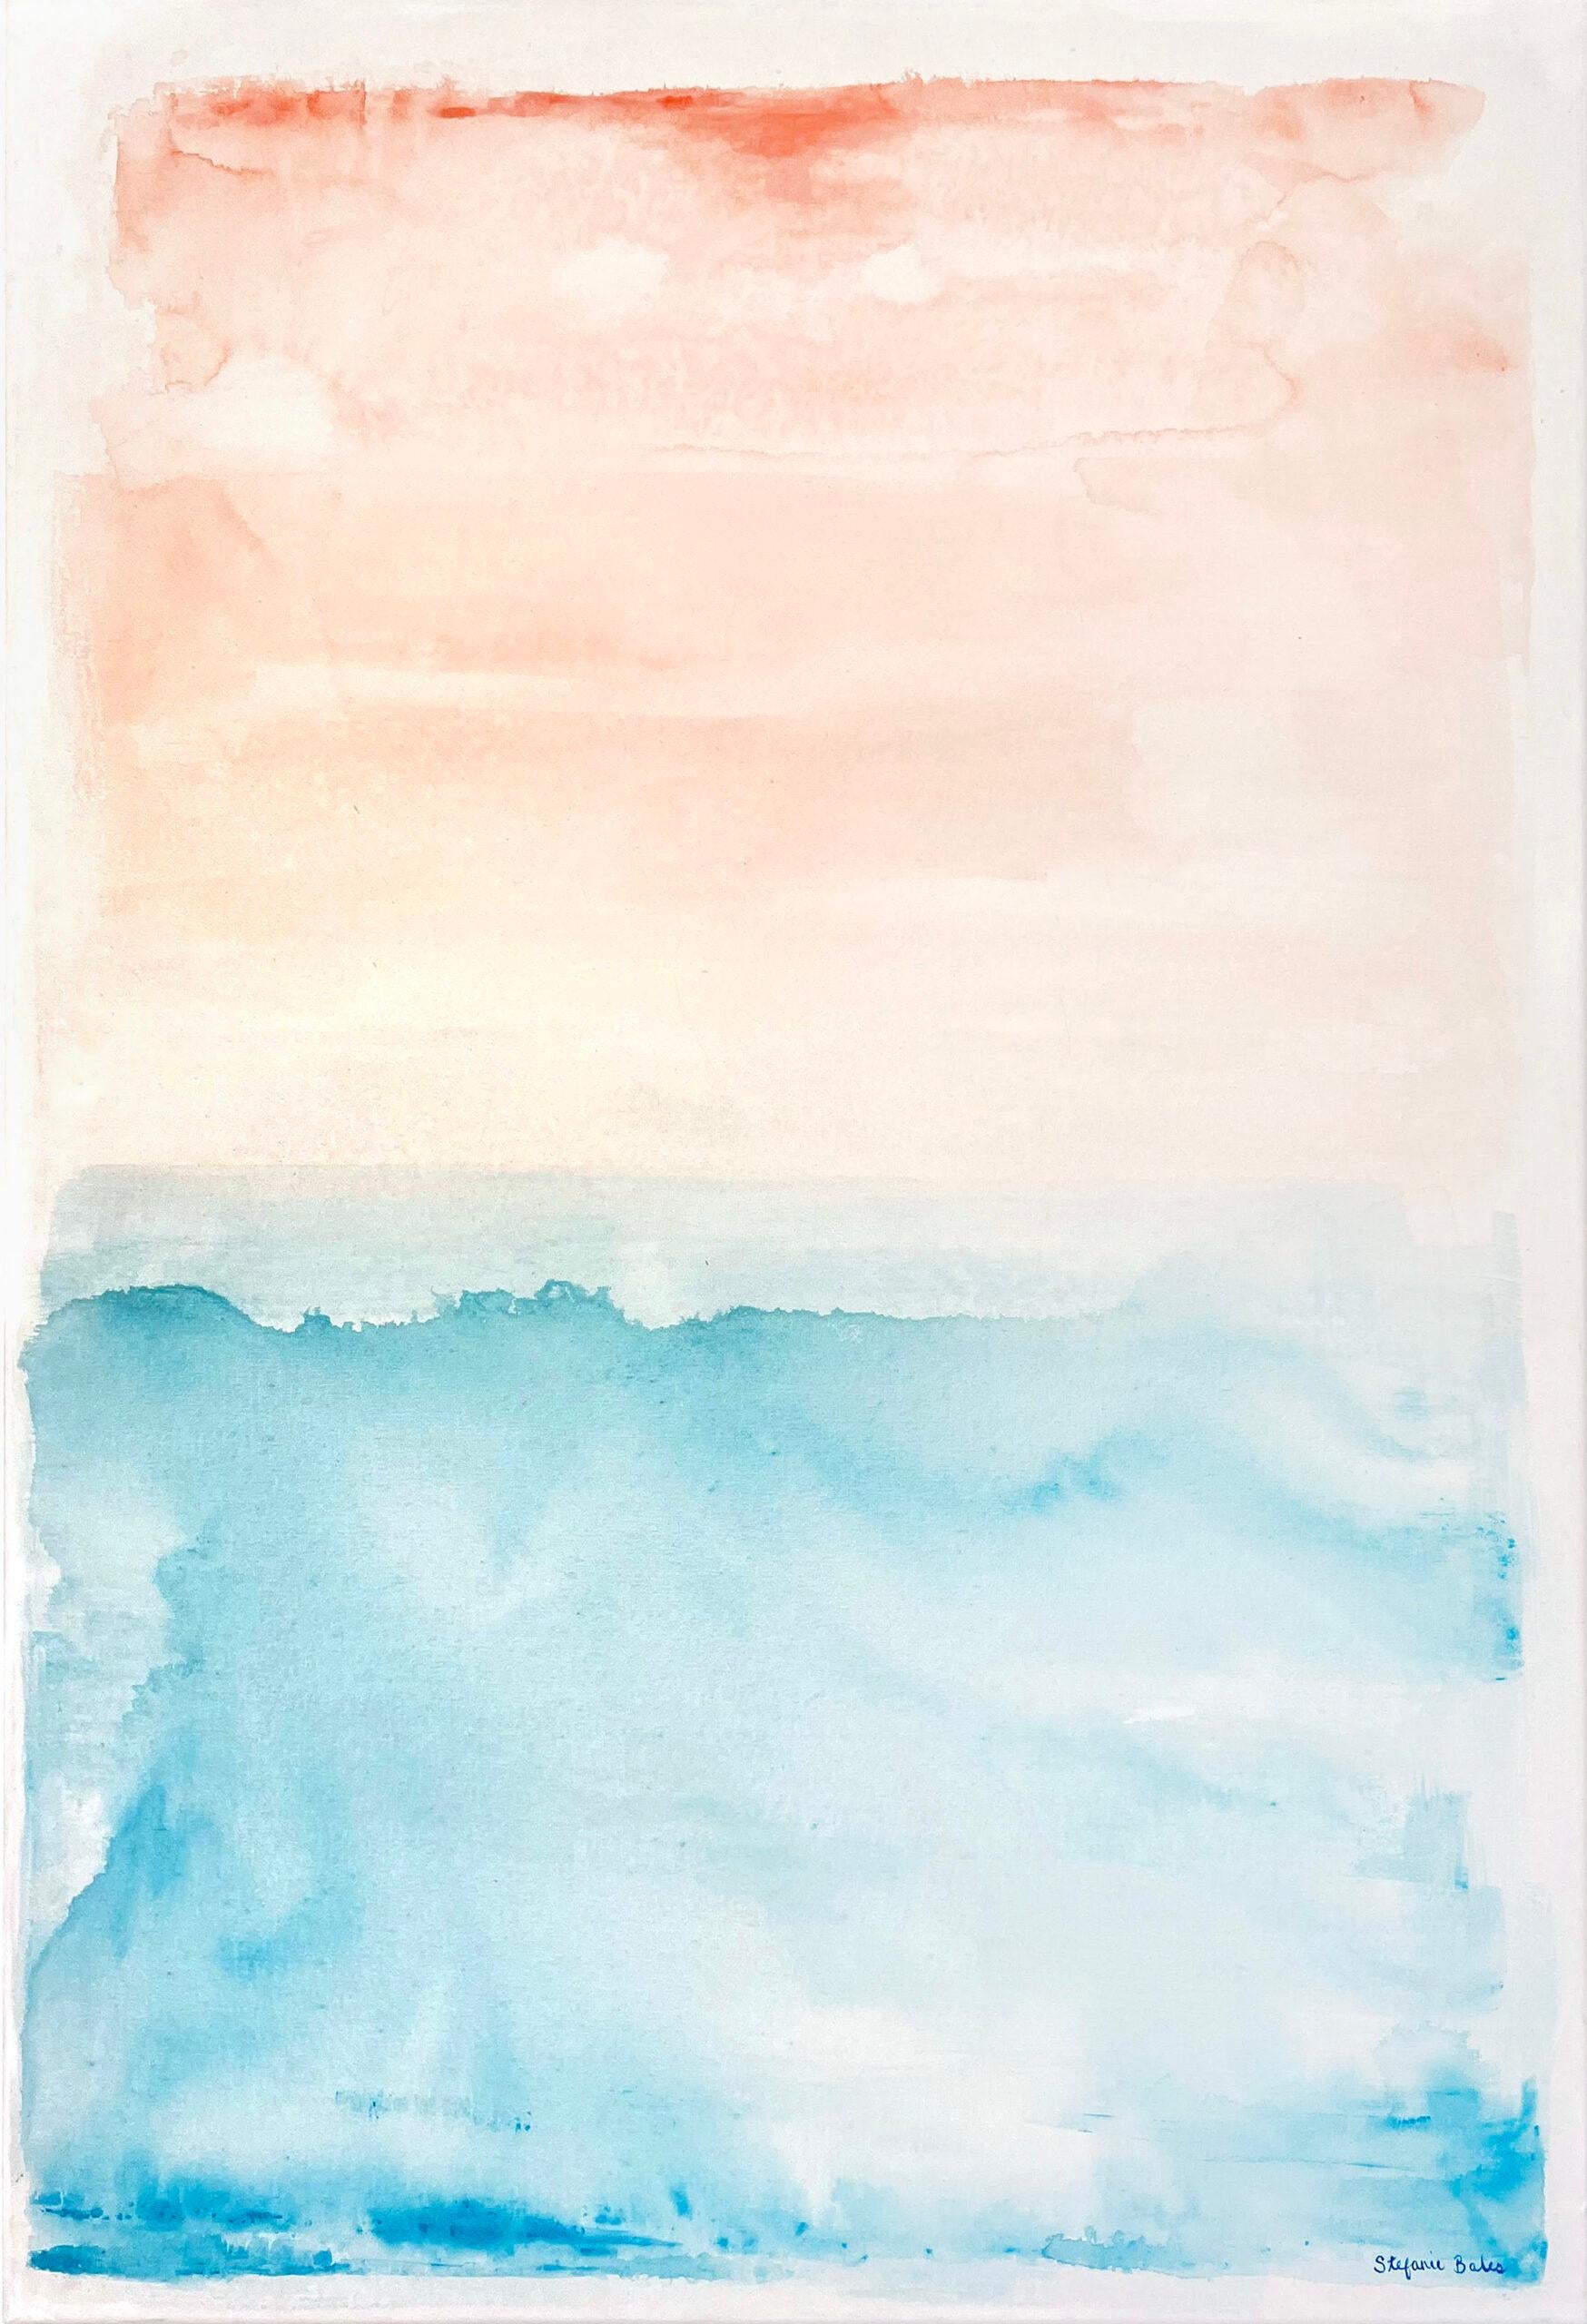 Stefanie Bales Abstract Painting - An Abstract Acrylic on Canvas Seascape, "Waves of Grace"